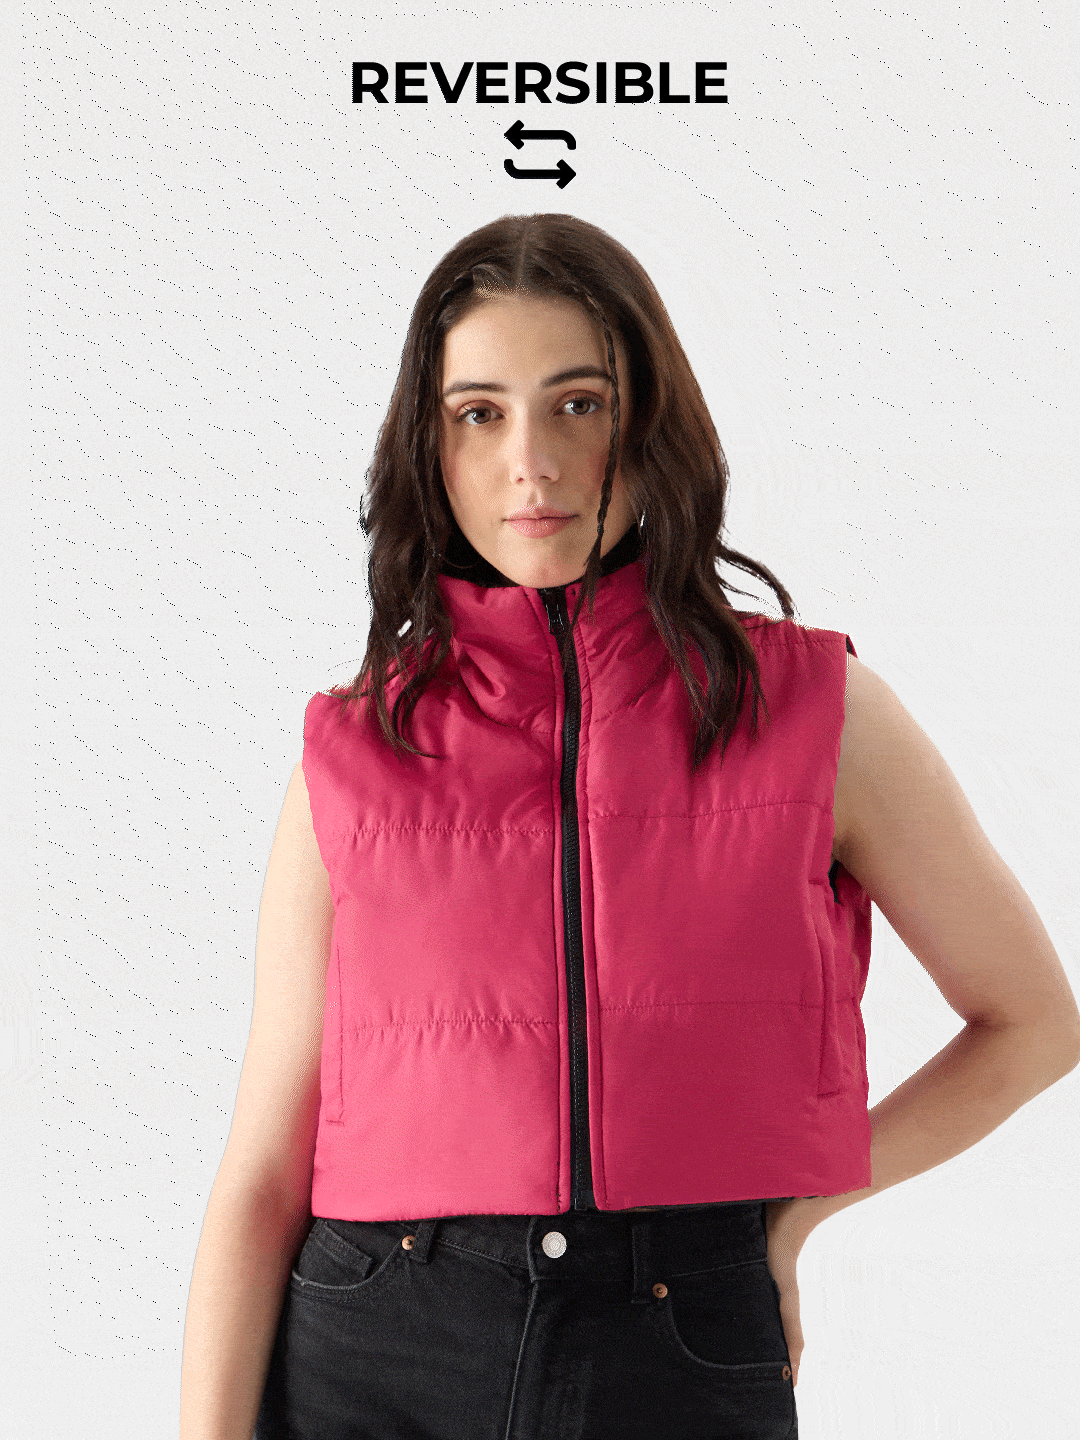 The Souled Store | Women's Solids: Pink, Black (Reversible) Women's Puffer Jackets